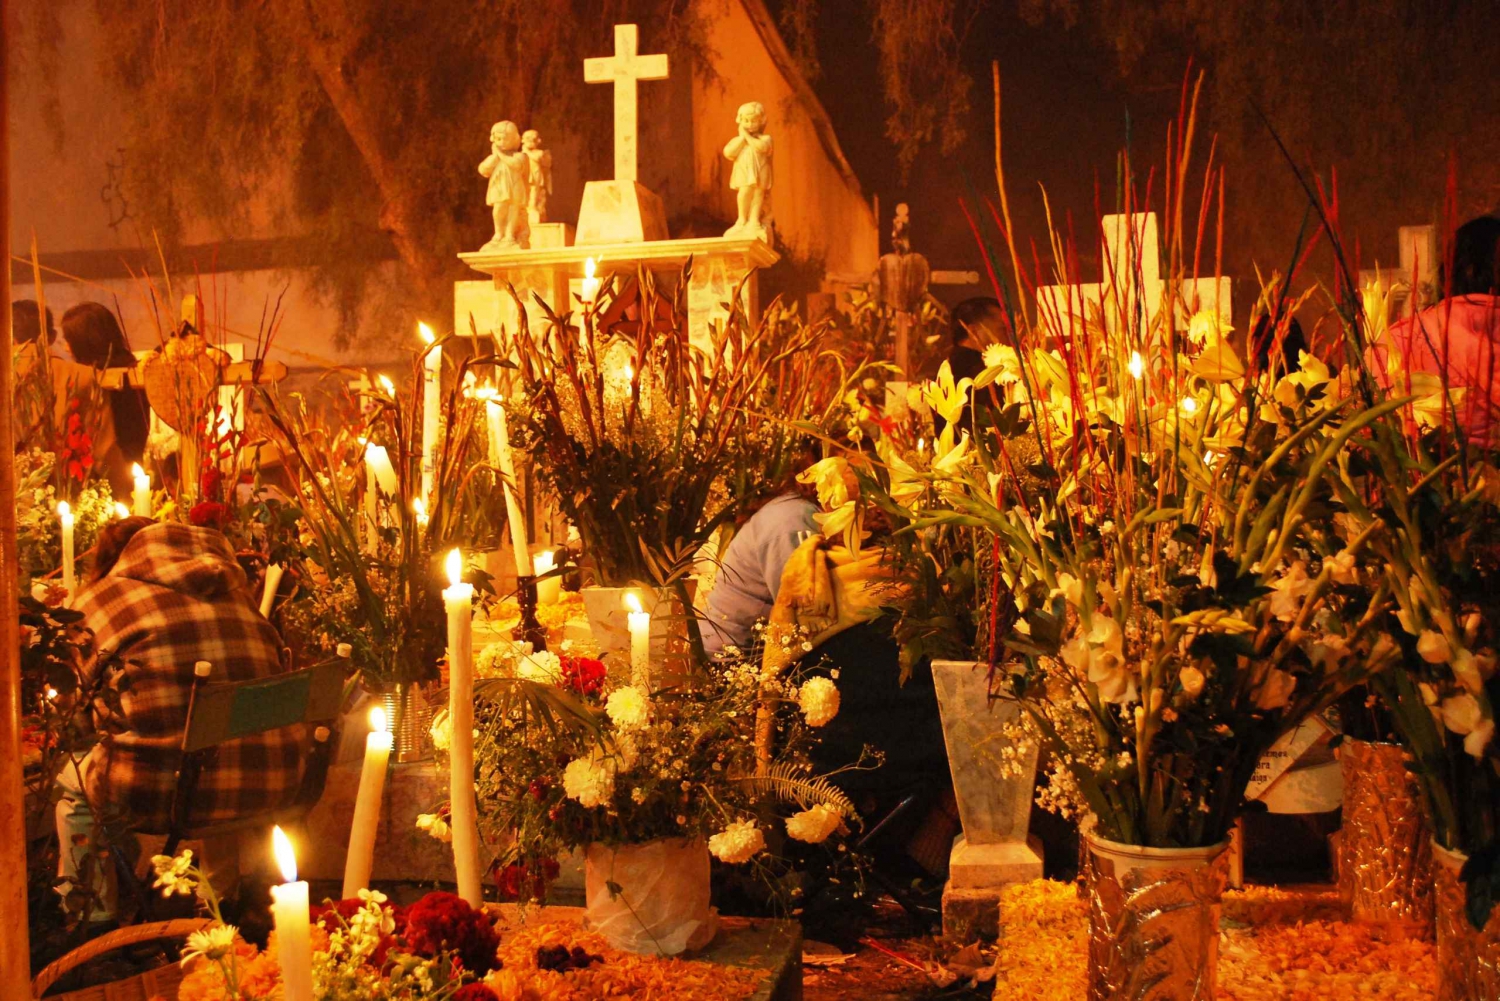 Mixquic Day of the Dead Celebration from Mexico City